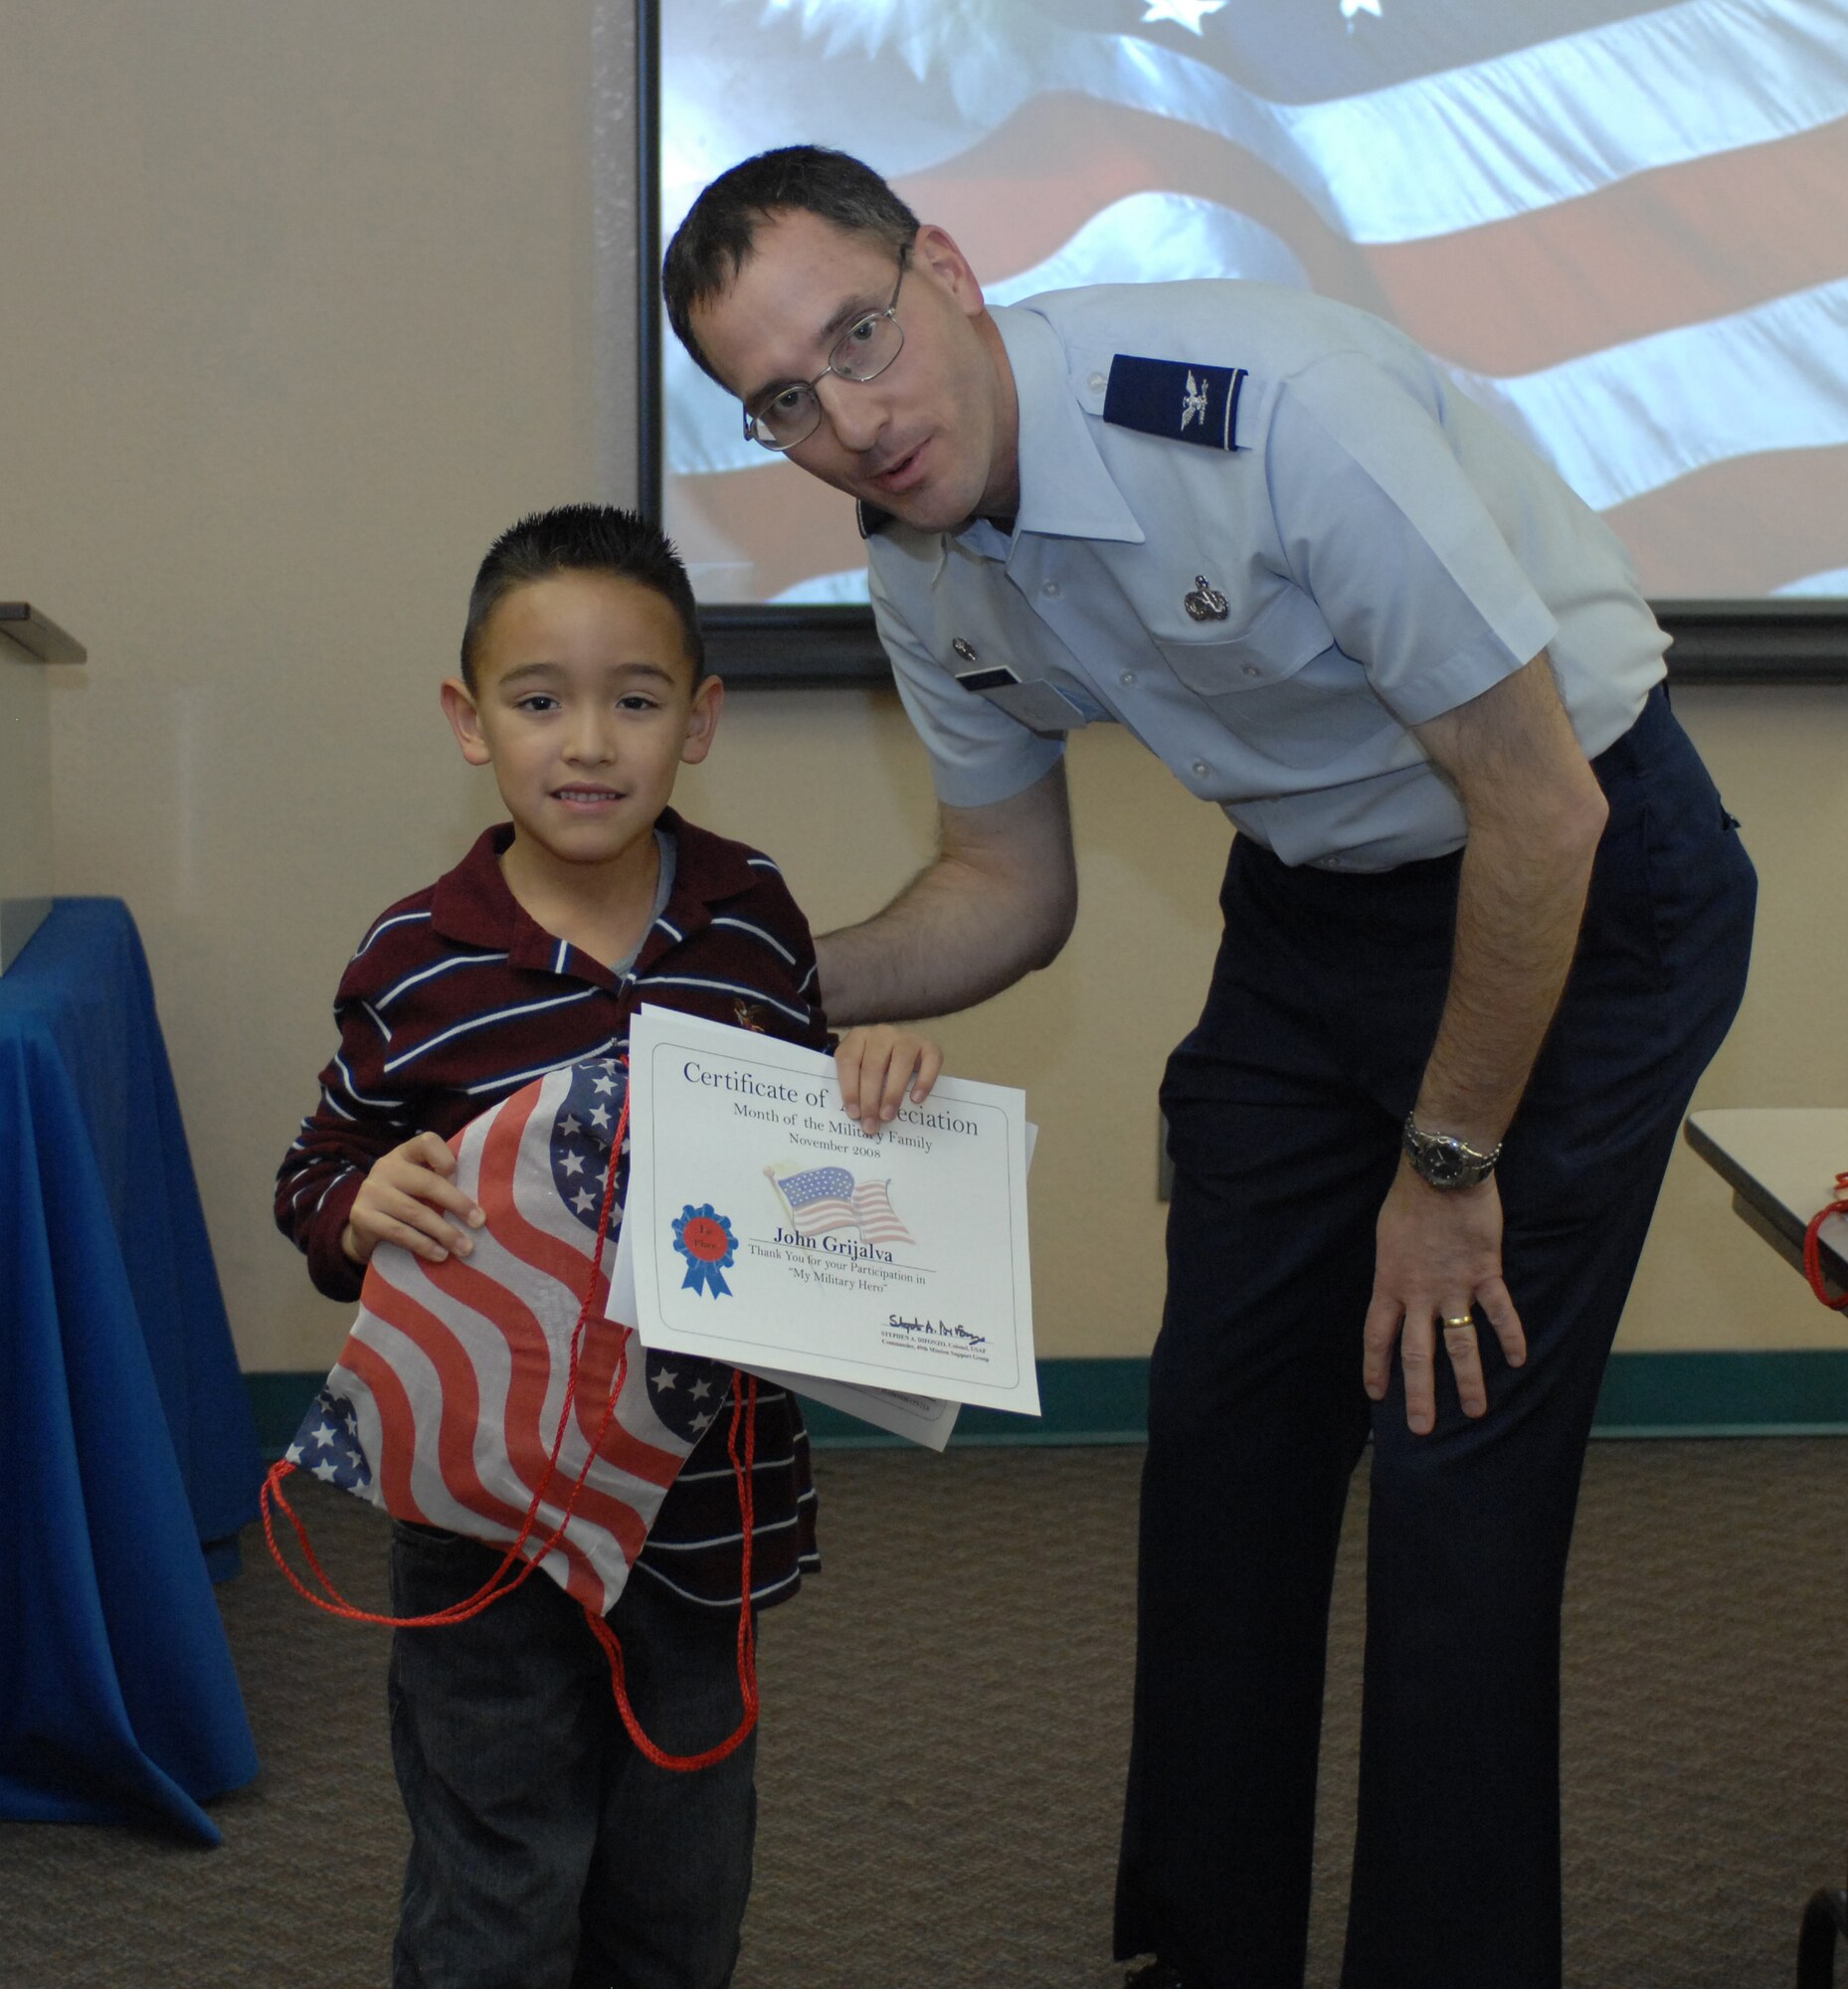 Col. Stephen DiFonzo, 49th Mission Support Group commander, presents an award to John Grijalva for winning 1st place in the 6 and under category of the drawing contest at the Airman and Family Readiness Center at Holloman Air Force Base, N.M., Nov. 24. The theme for the drawing contest was "My Military Hero" in support of Military Family Appreciation Month. (U.S. Air Force photo/Airman Sondra M. Escutia)